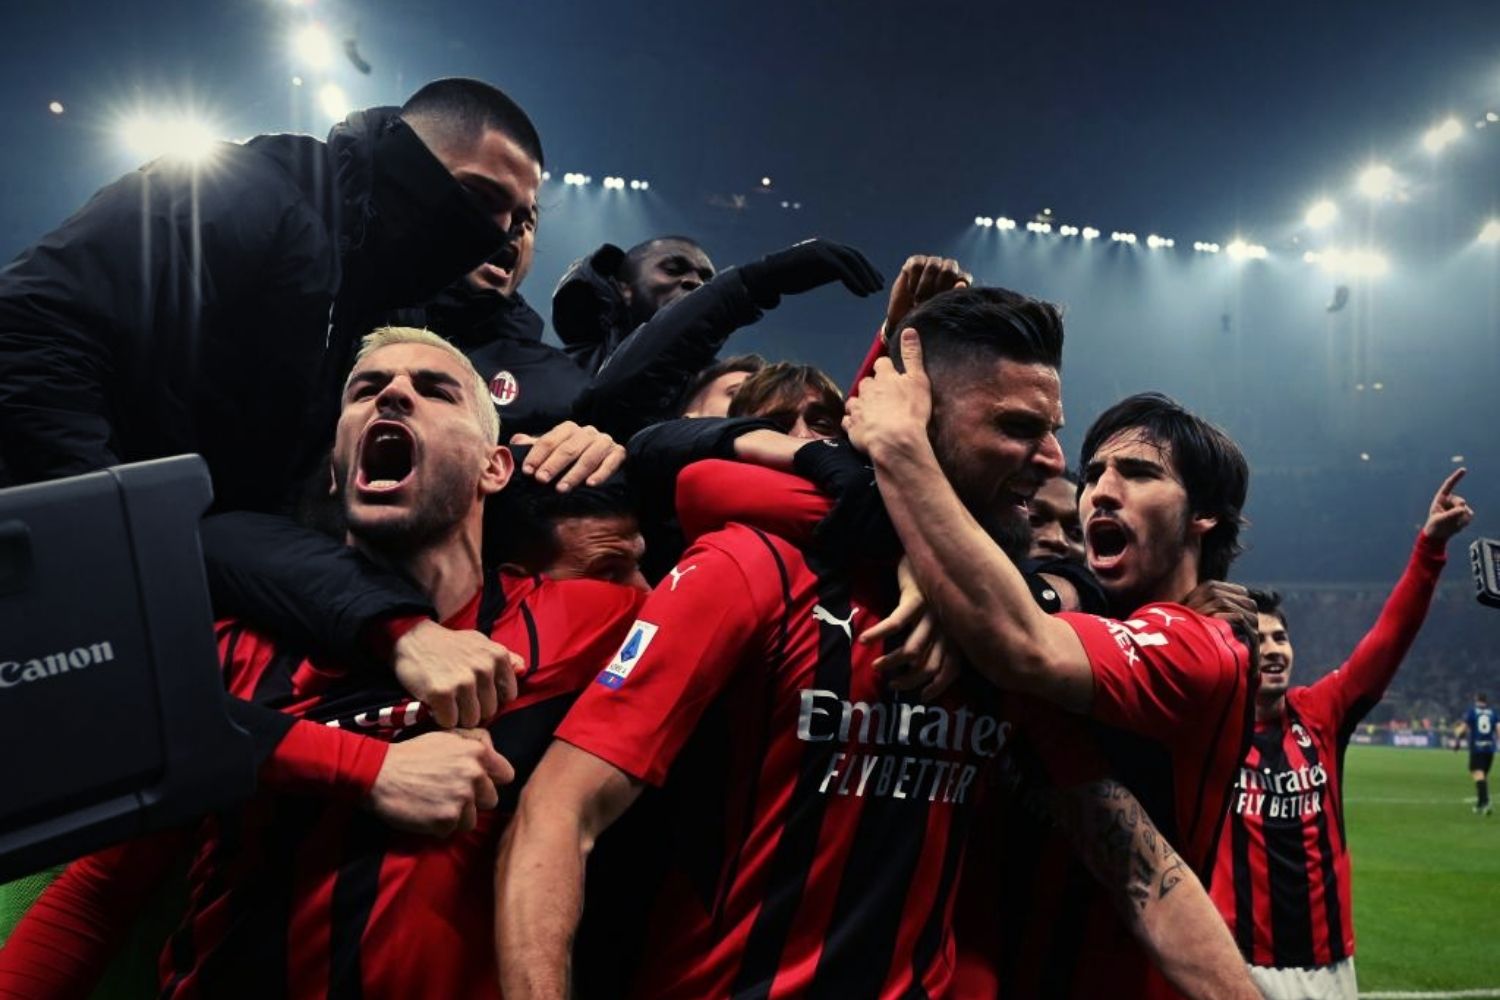 AC Milan wins the Scudetto for the first time in 11 years